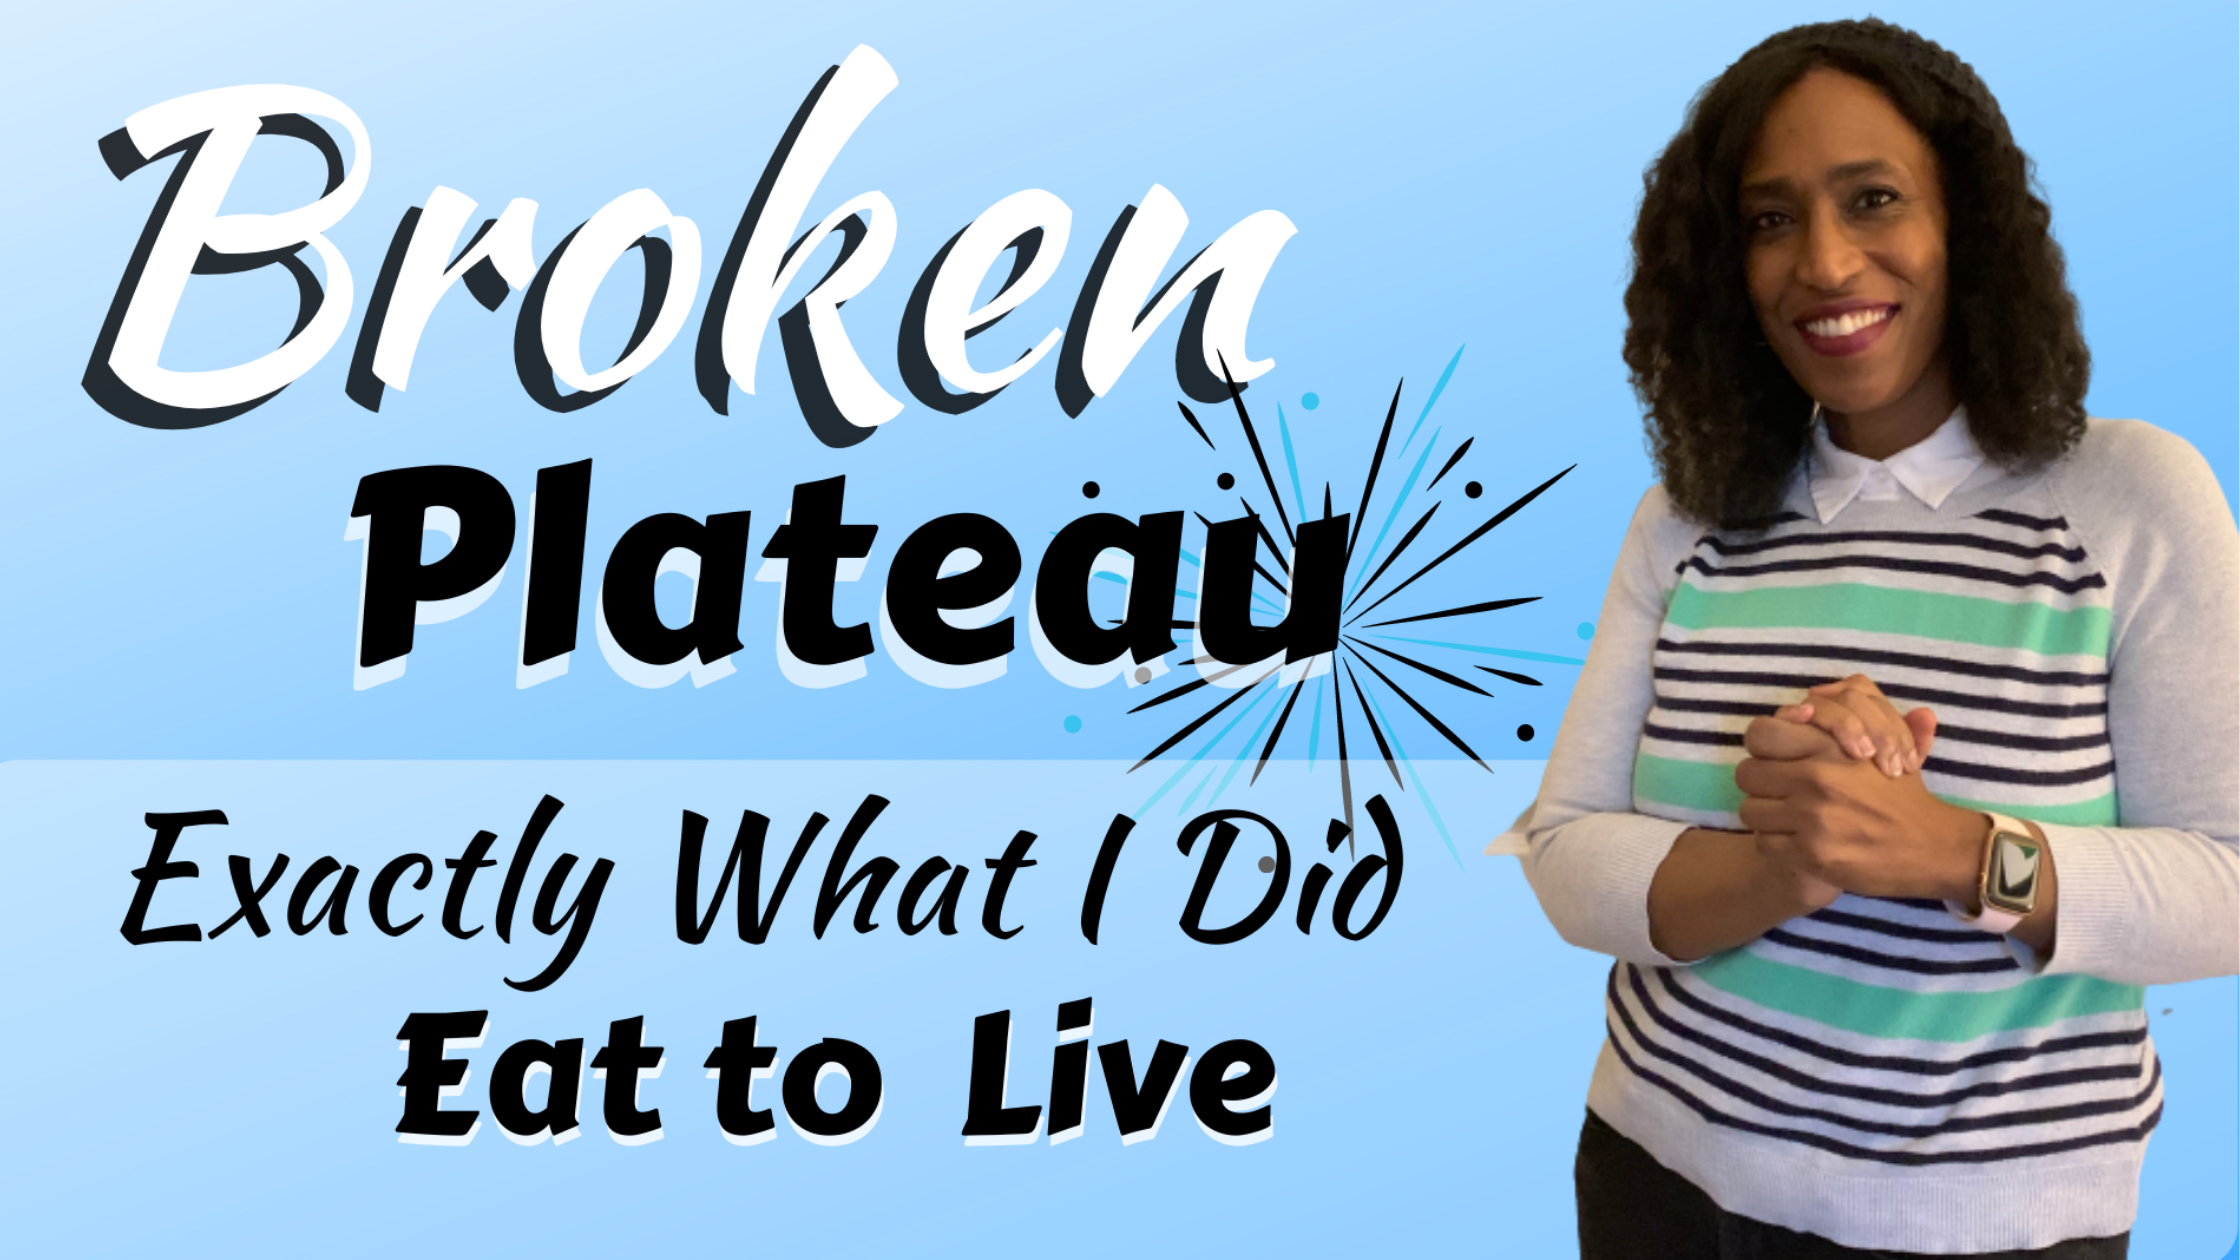 I’m On a 30-Pound Weight Loss Journey: Plateau Broken!